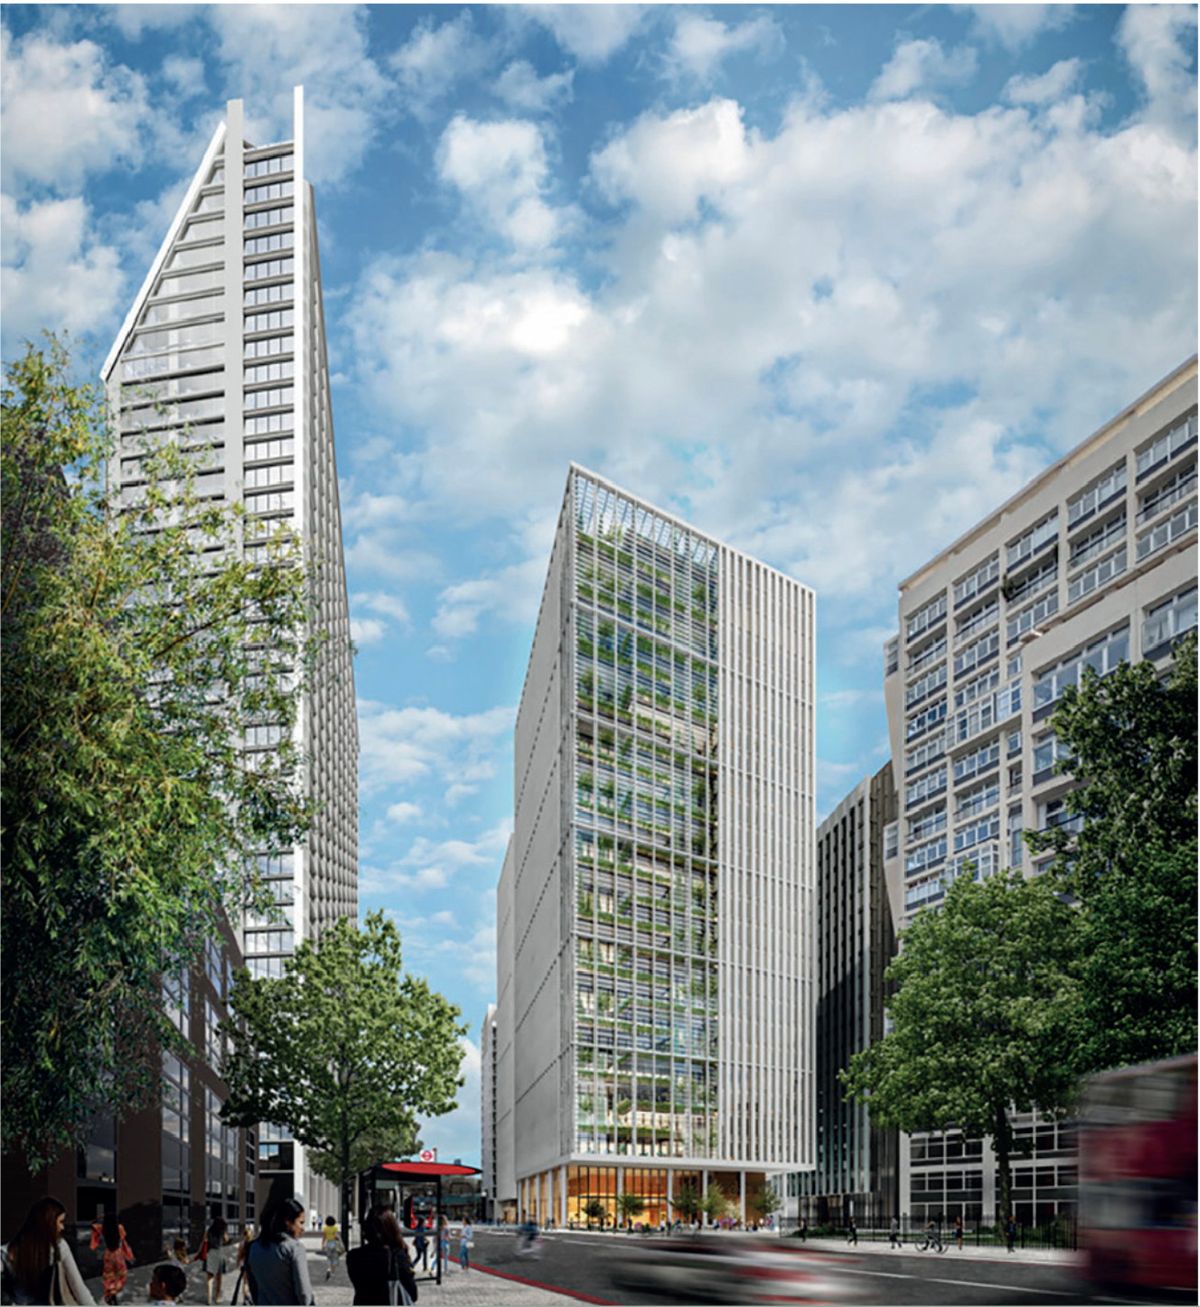 Hotel and offices to replace Salvation Army Elephant & Castle HQ